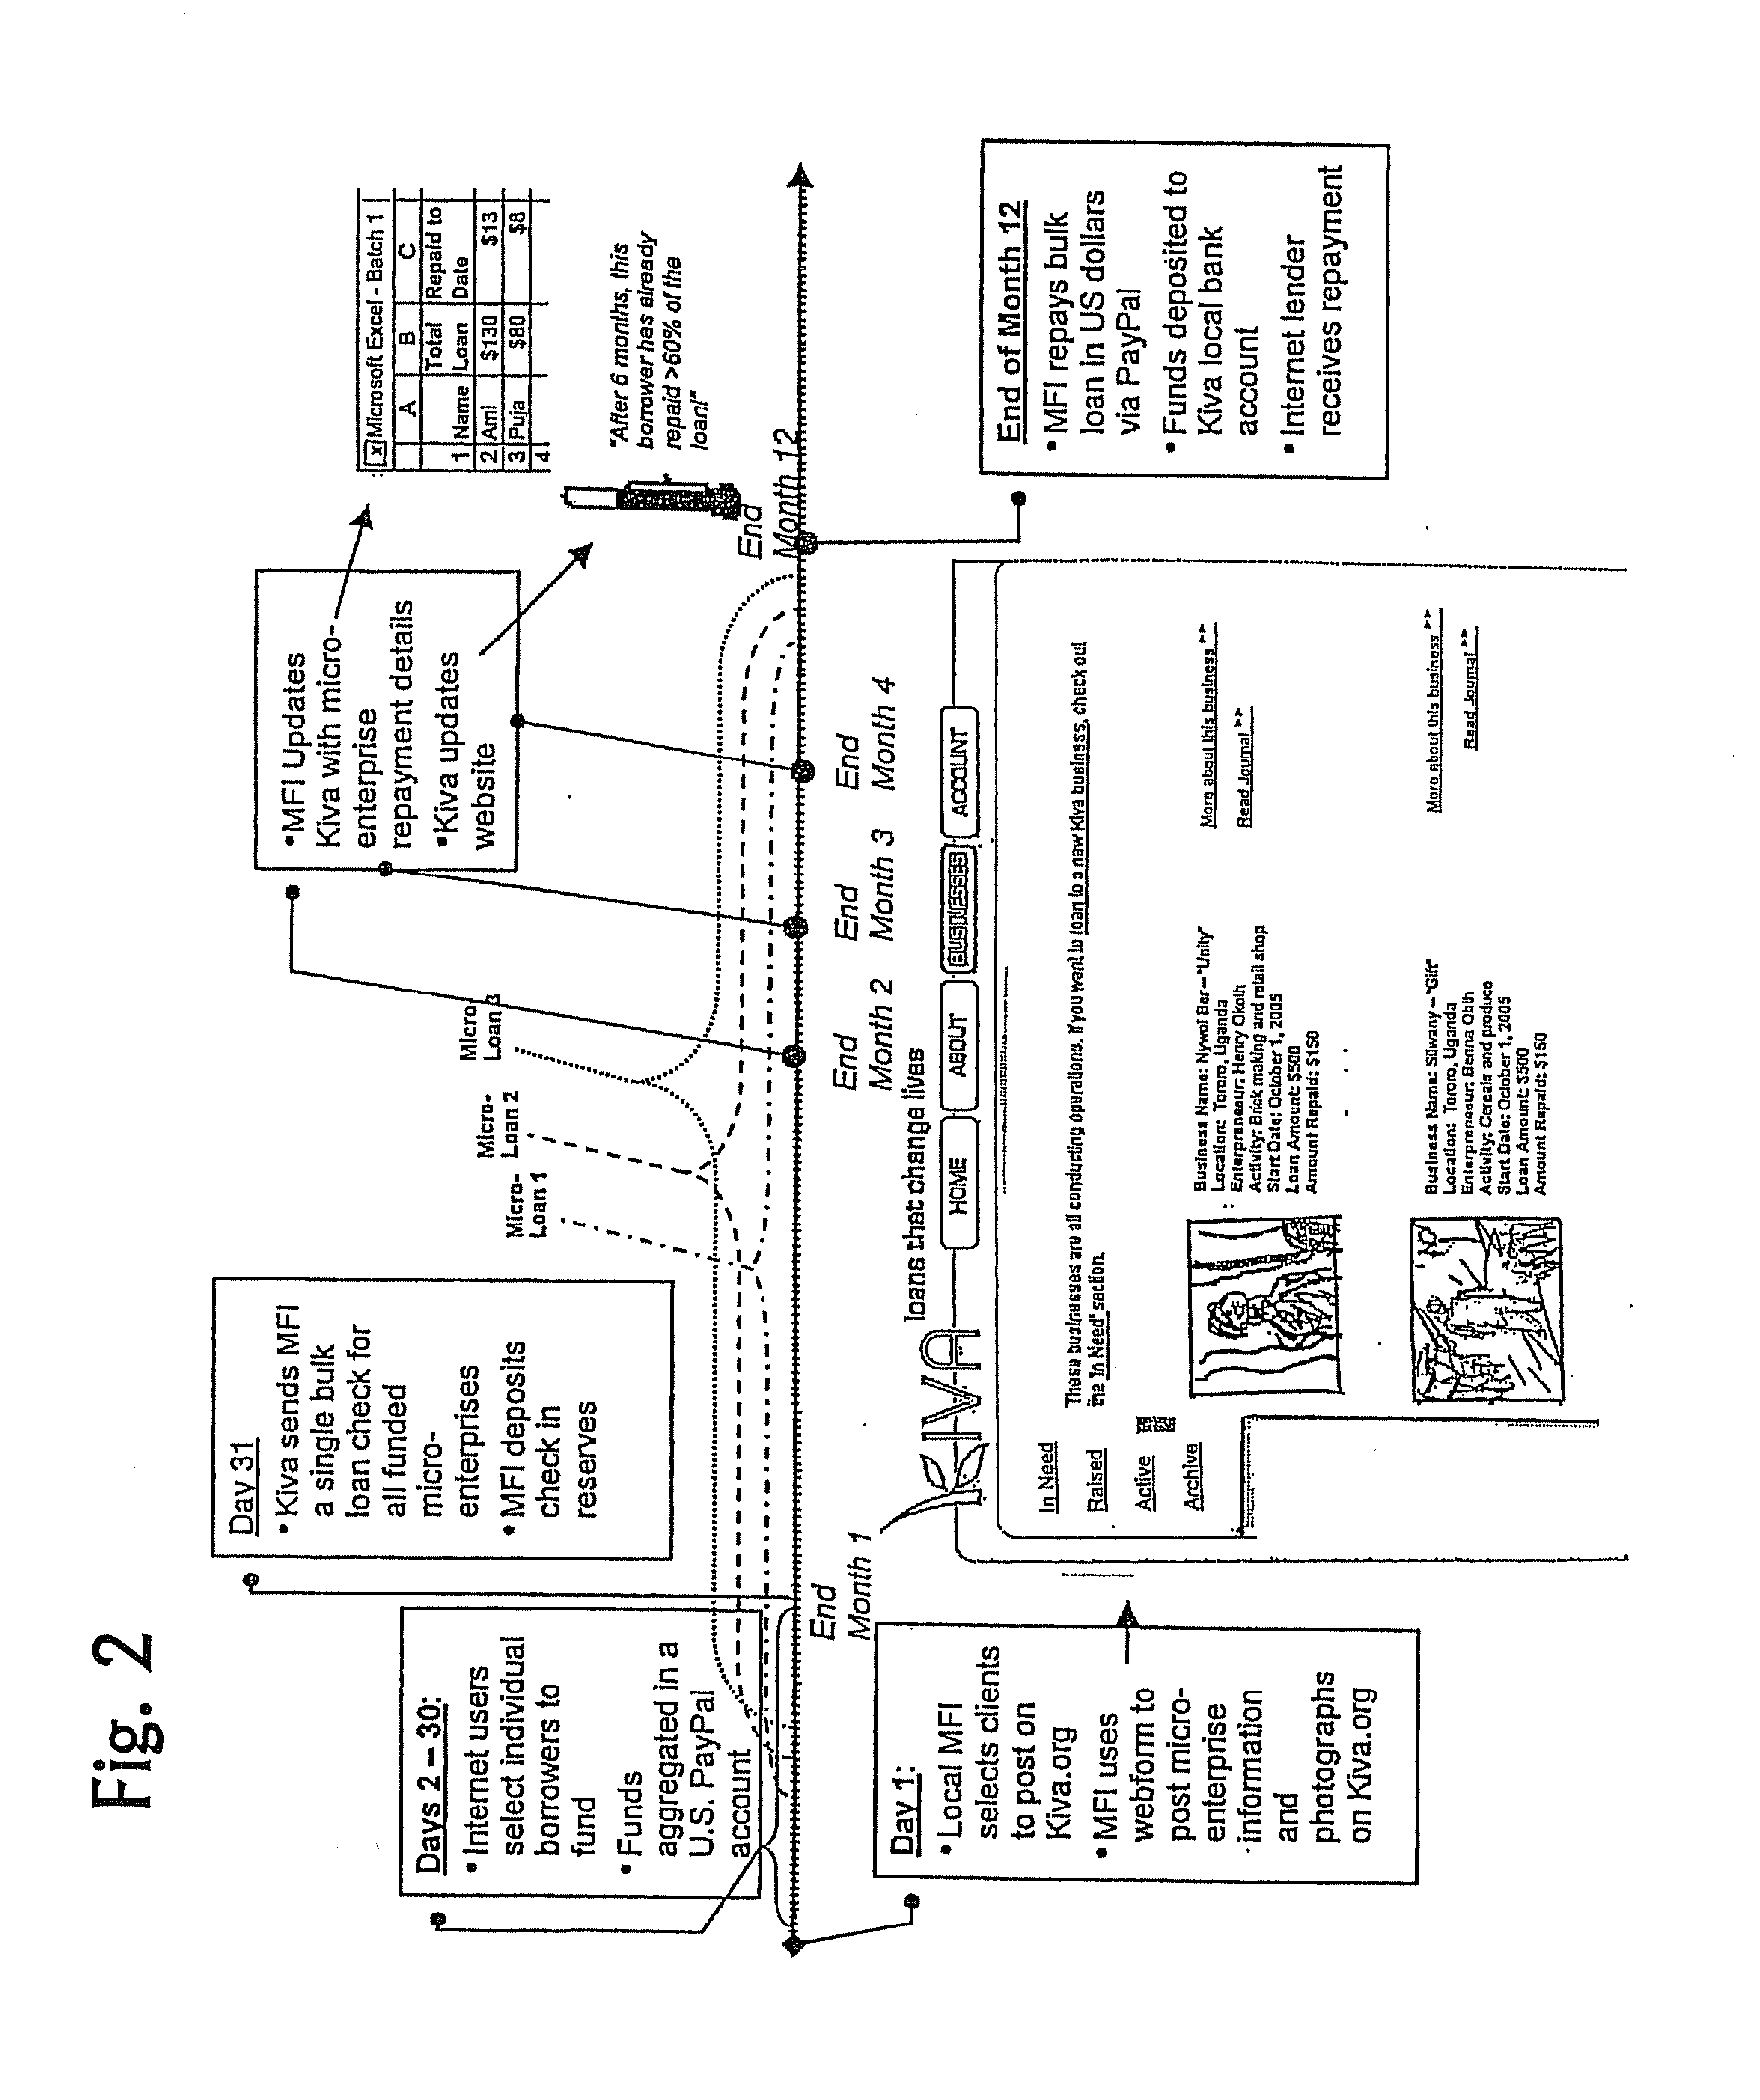 System and method for peer-to-peer financing